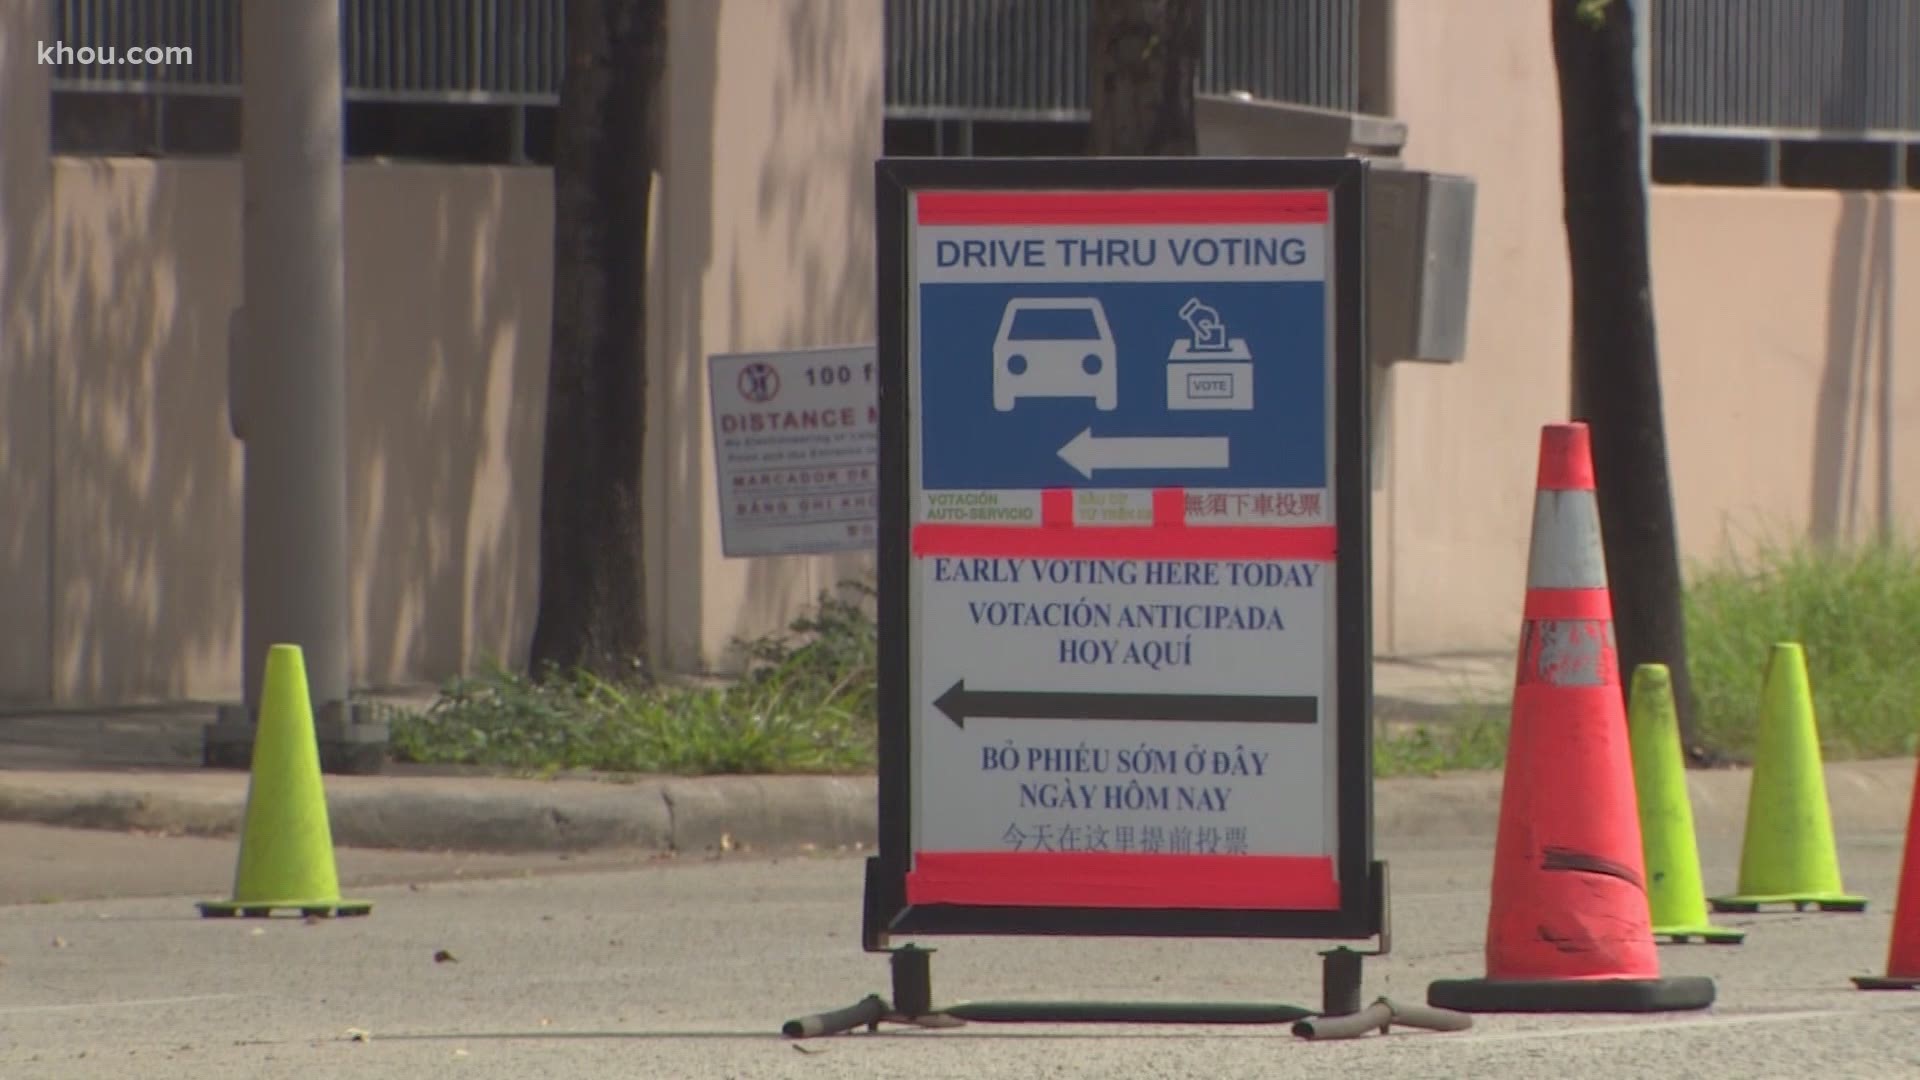 County leaders are hoping to push turnout even higher this weekend.